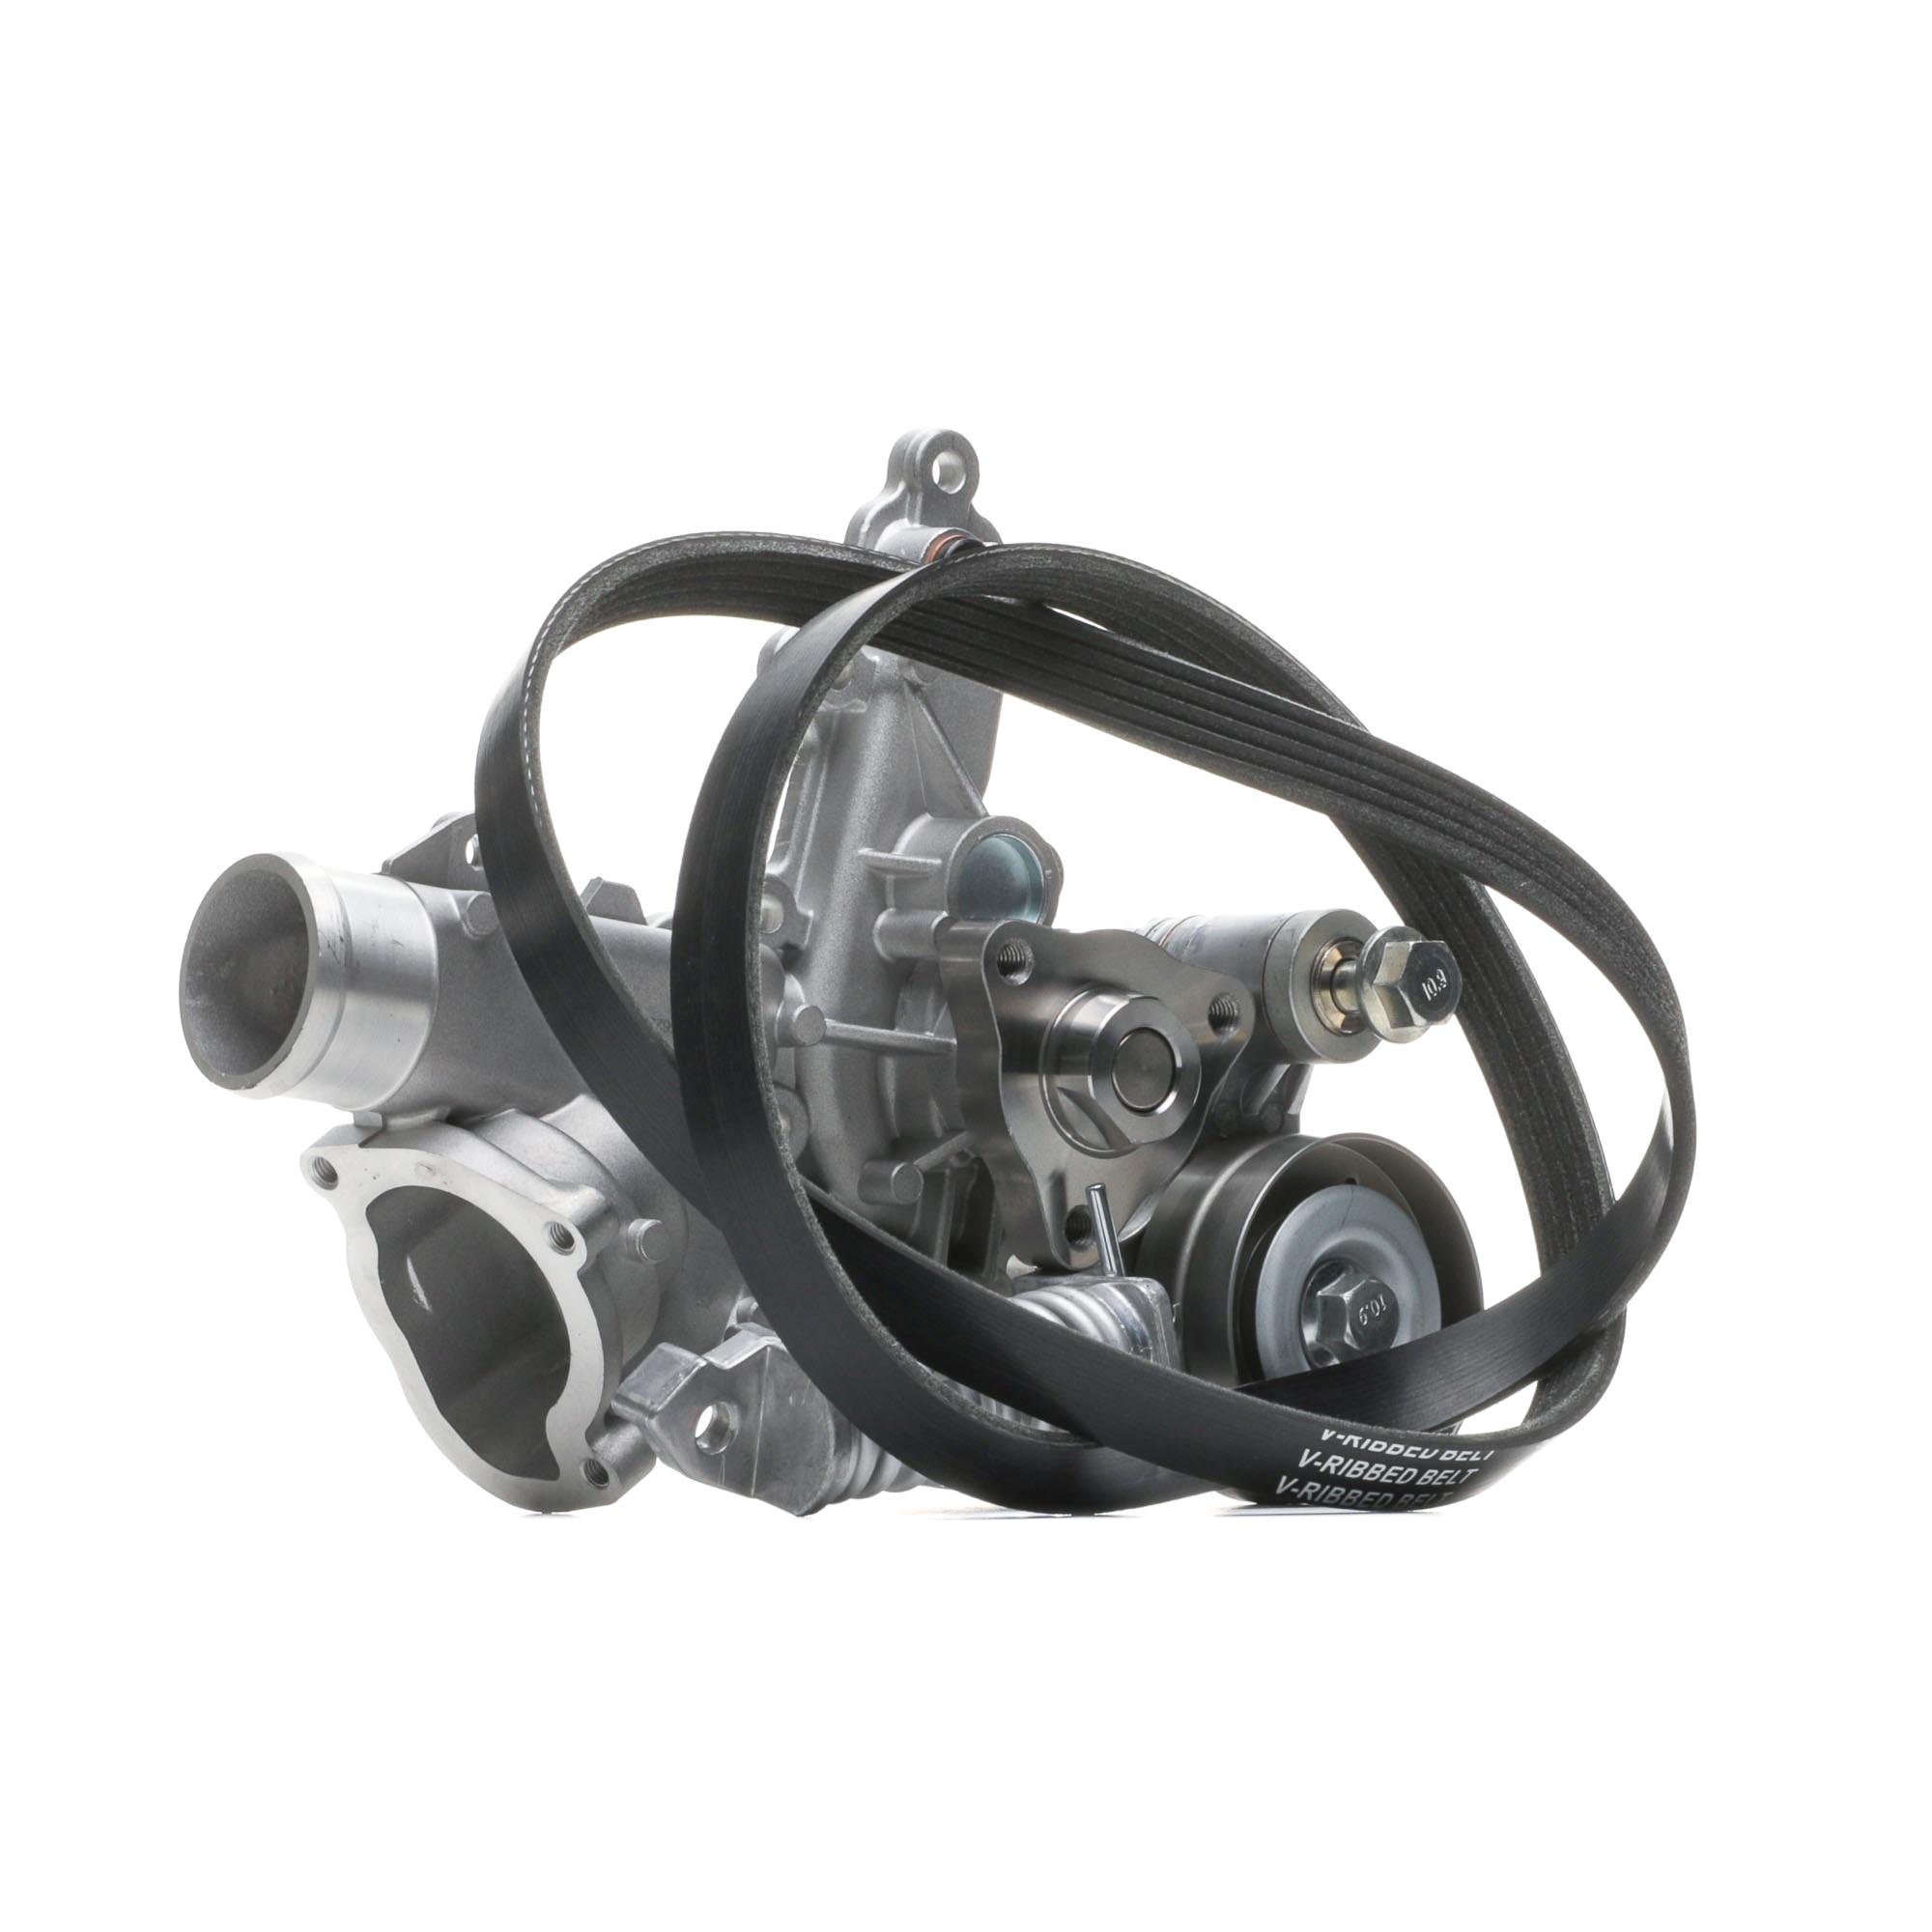 Auxiliary belt kit RIDEX with water pump, Check alternator freewheel clutch & replace if necessary - 4172P0006